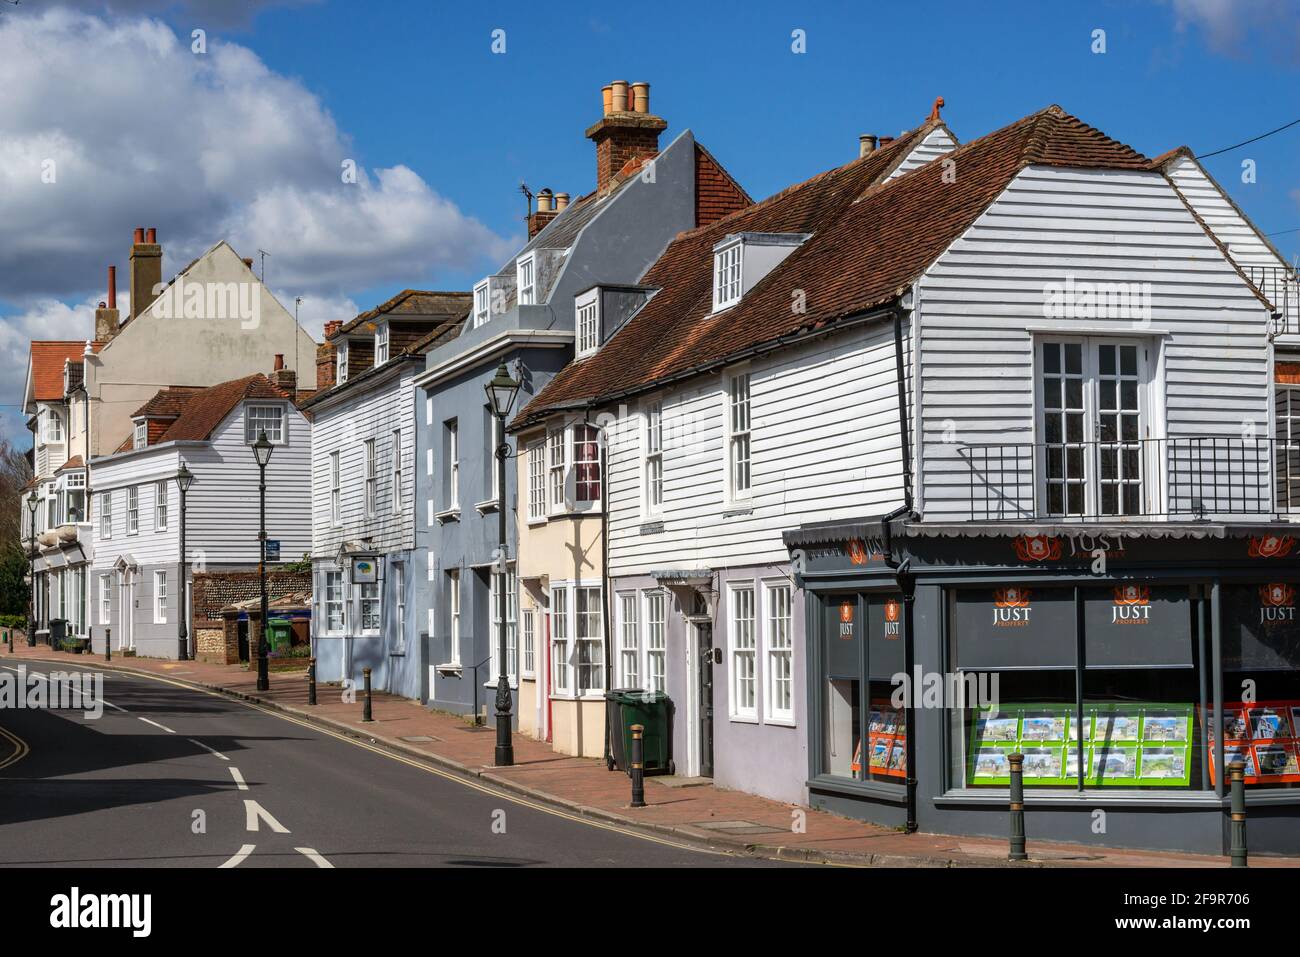 Bexhill, April 6th 2021: General View of Bexhill Old Town Stock Photo